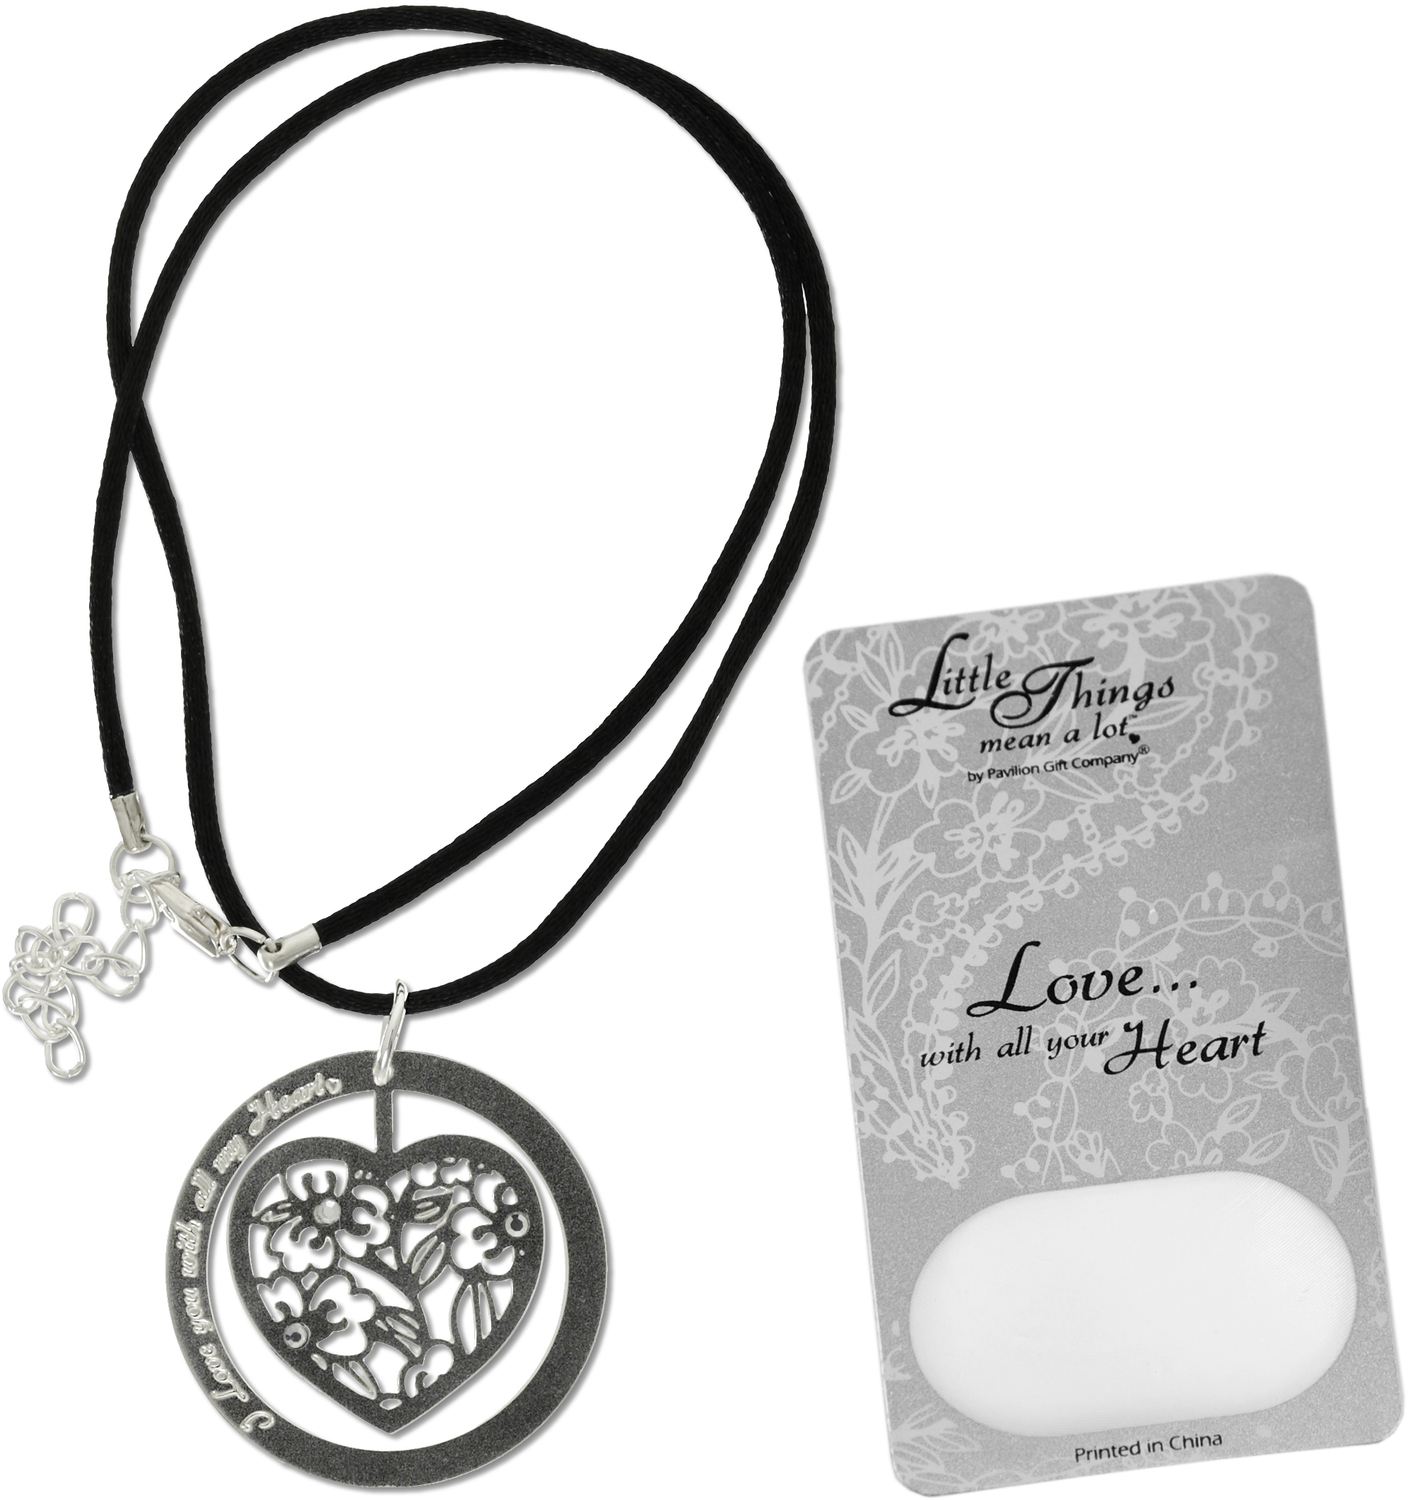 Love Necklace by Little Things Mean A Lot - Love Necklace - With 1.5" Heart Pendant